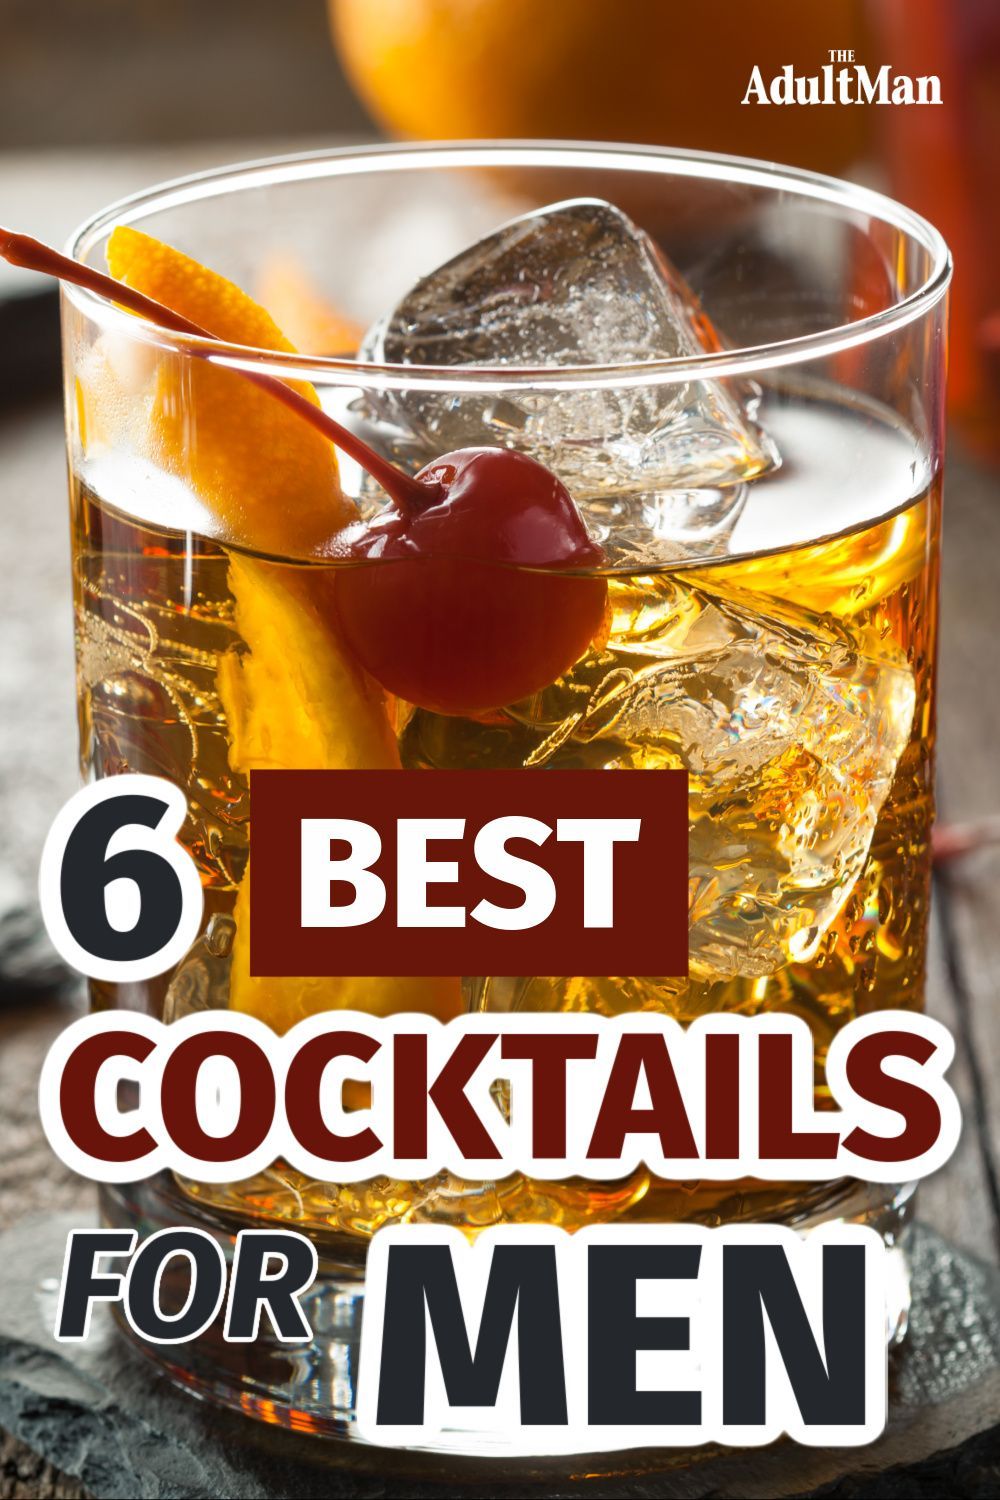 6 Best Cocktails for Men: Mixed Drinks Every Guy Should Try at Least Once